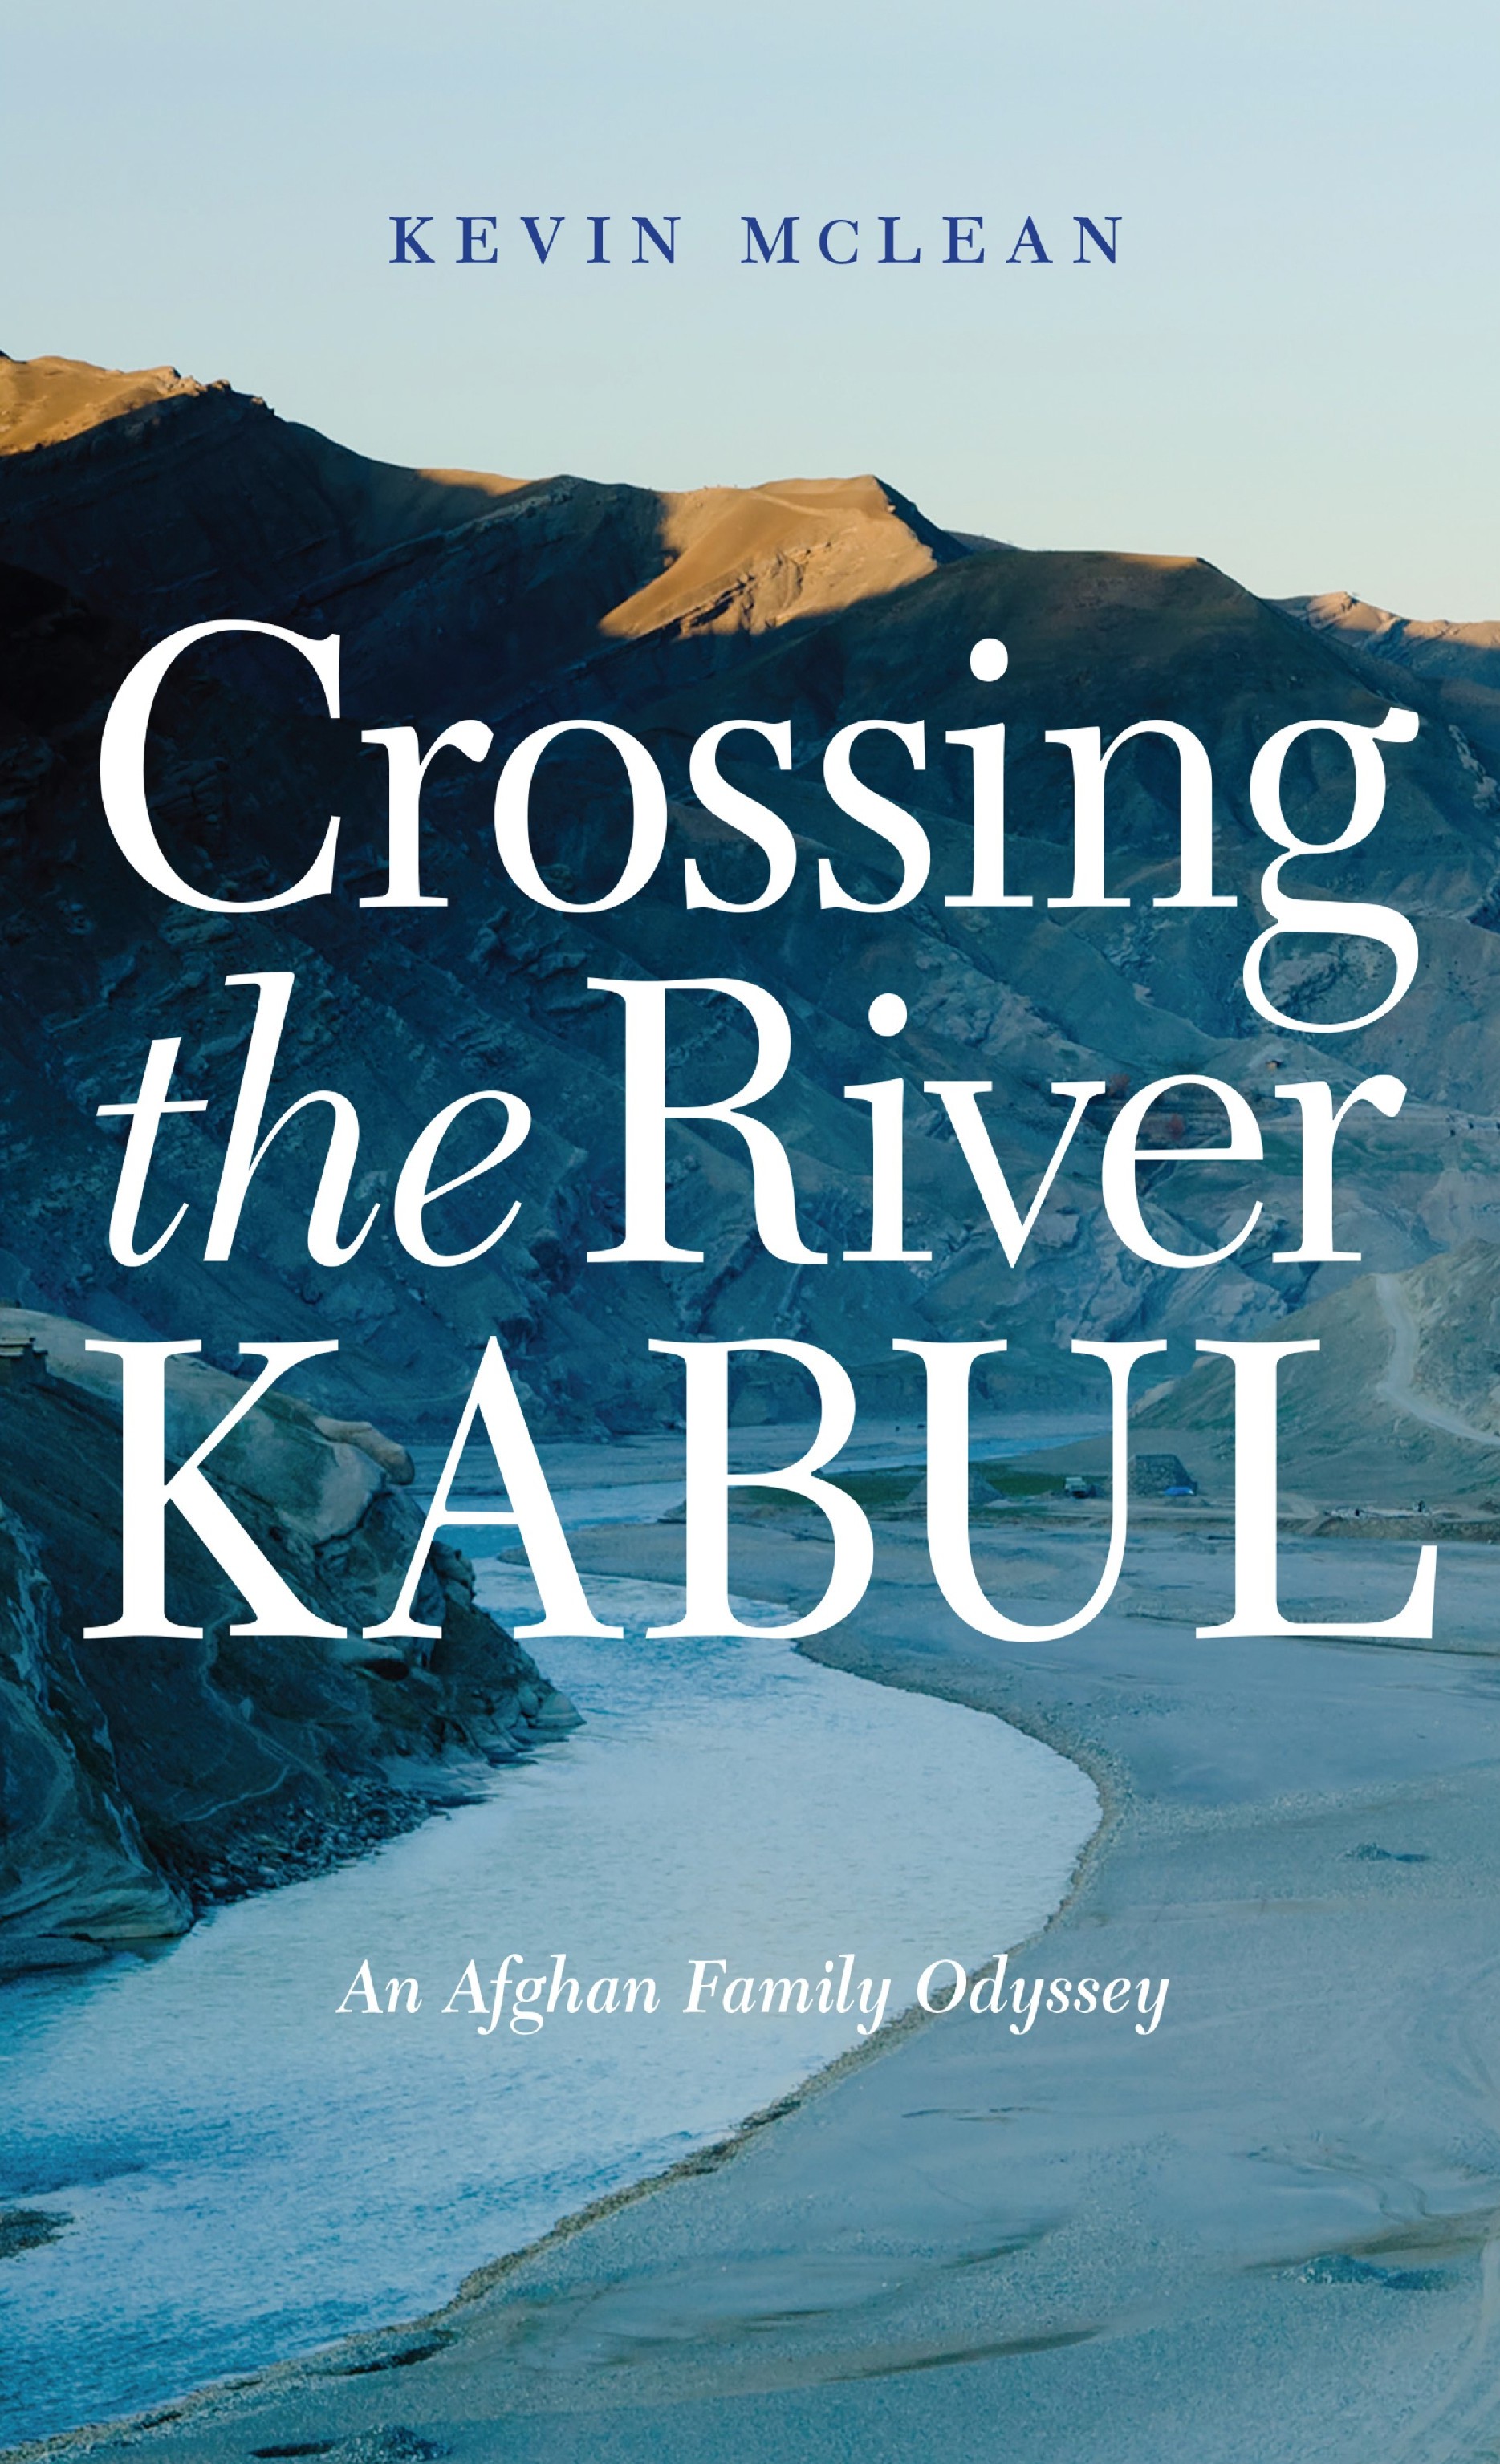 Crossing the River Kabul: An Afghan Family Odyssey